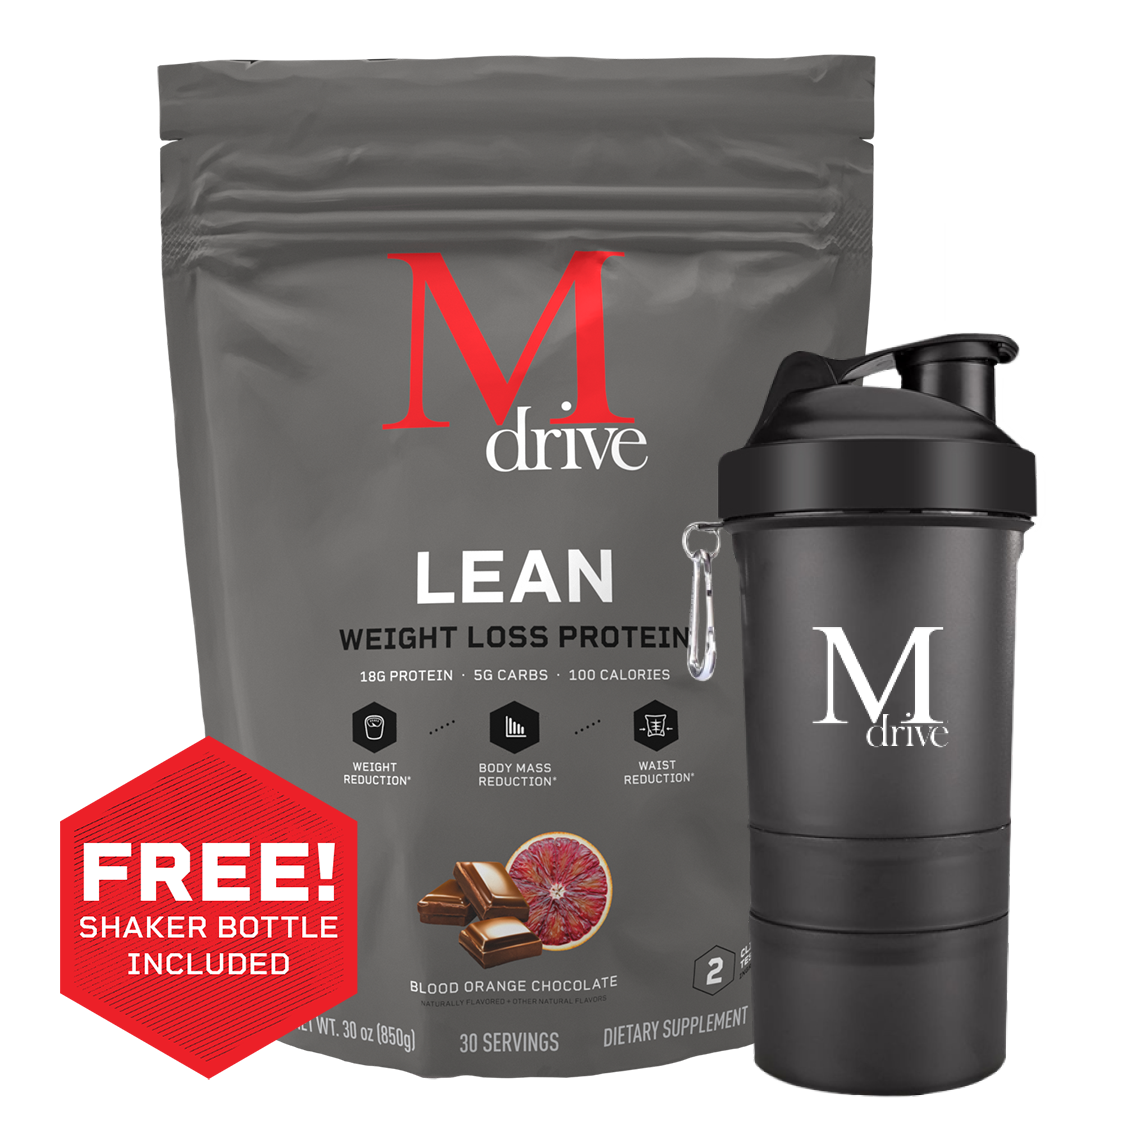 Mdrive Lean with free shaker bottle